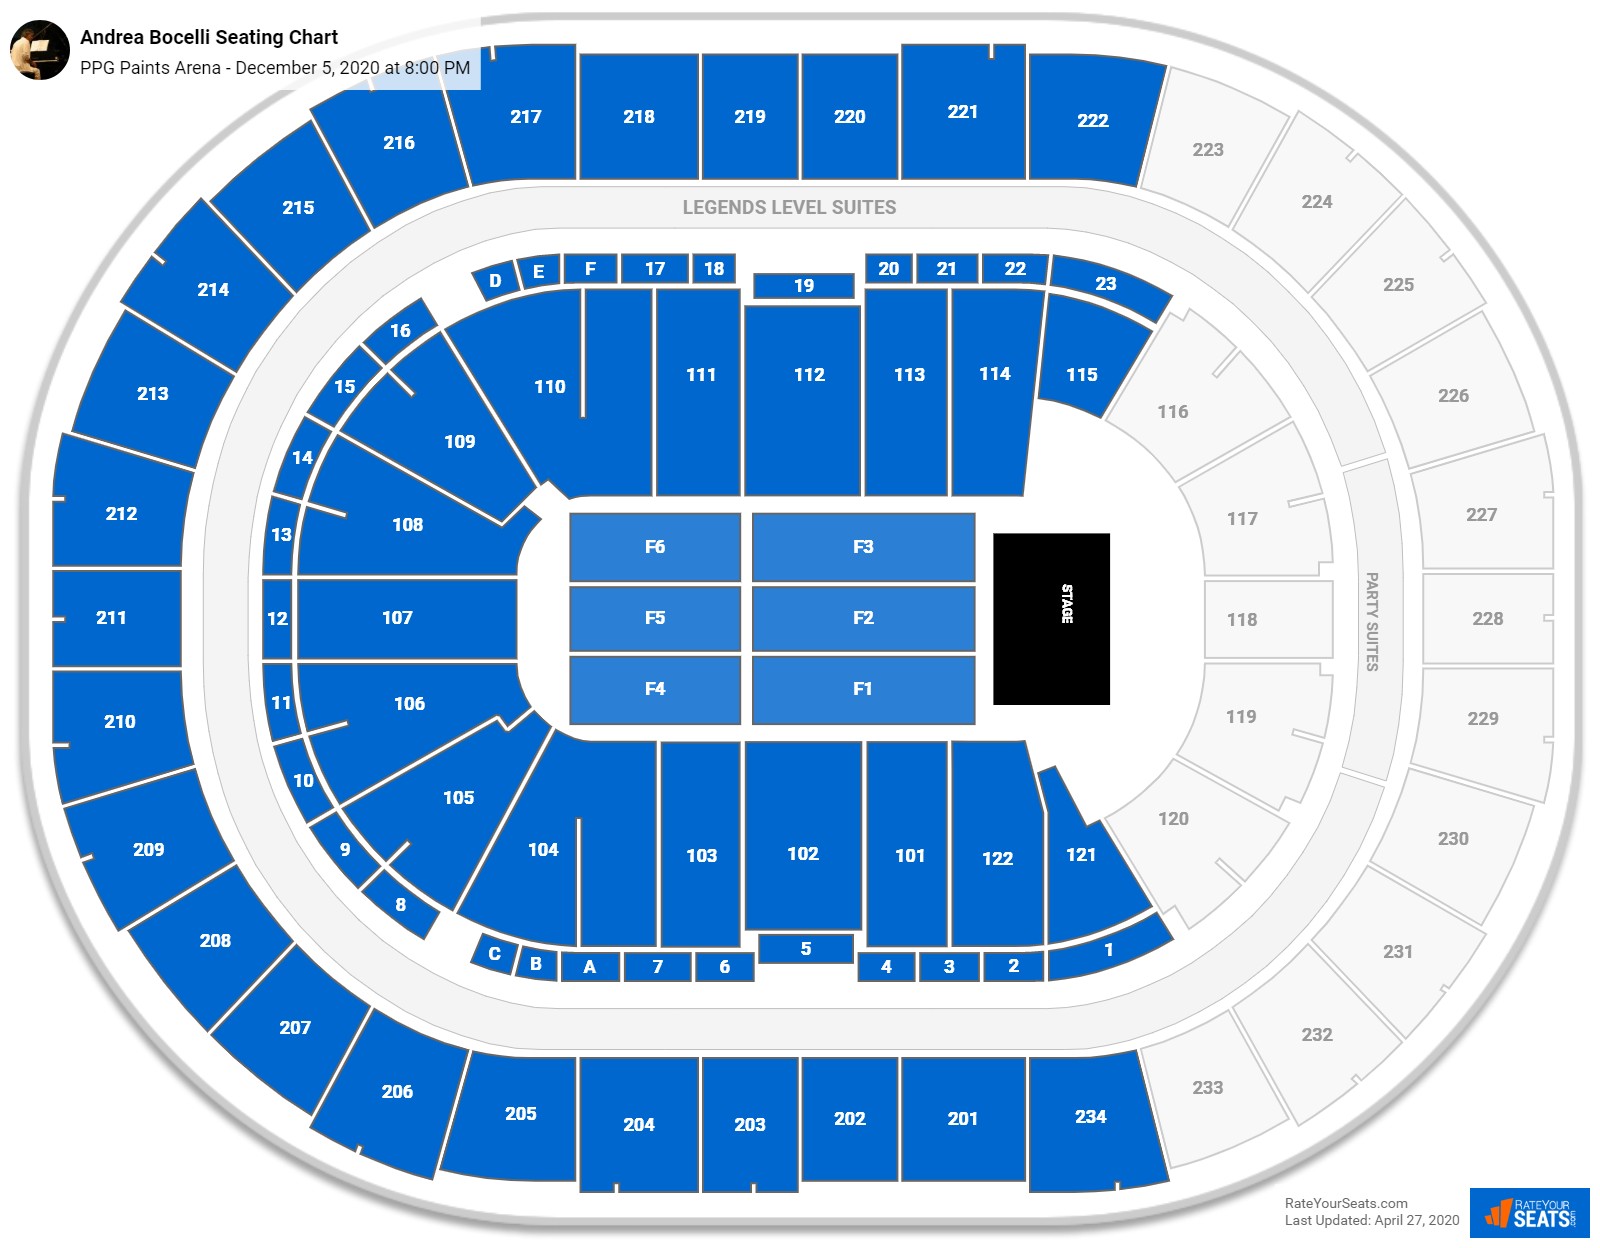 valley view casino seating for andrea bocelli